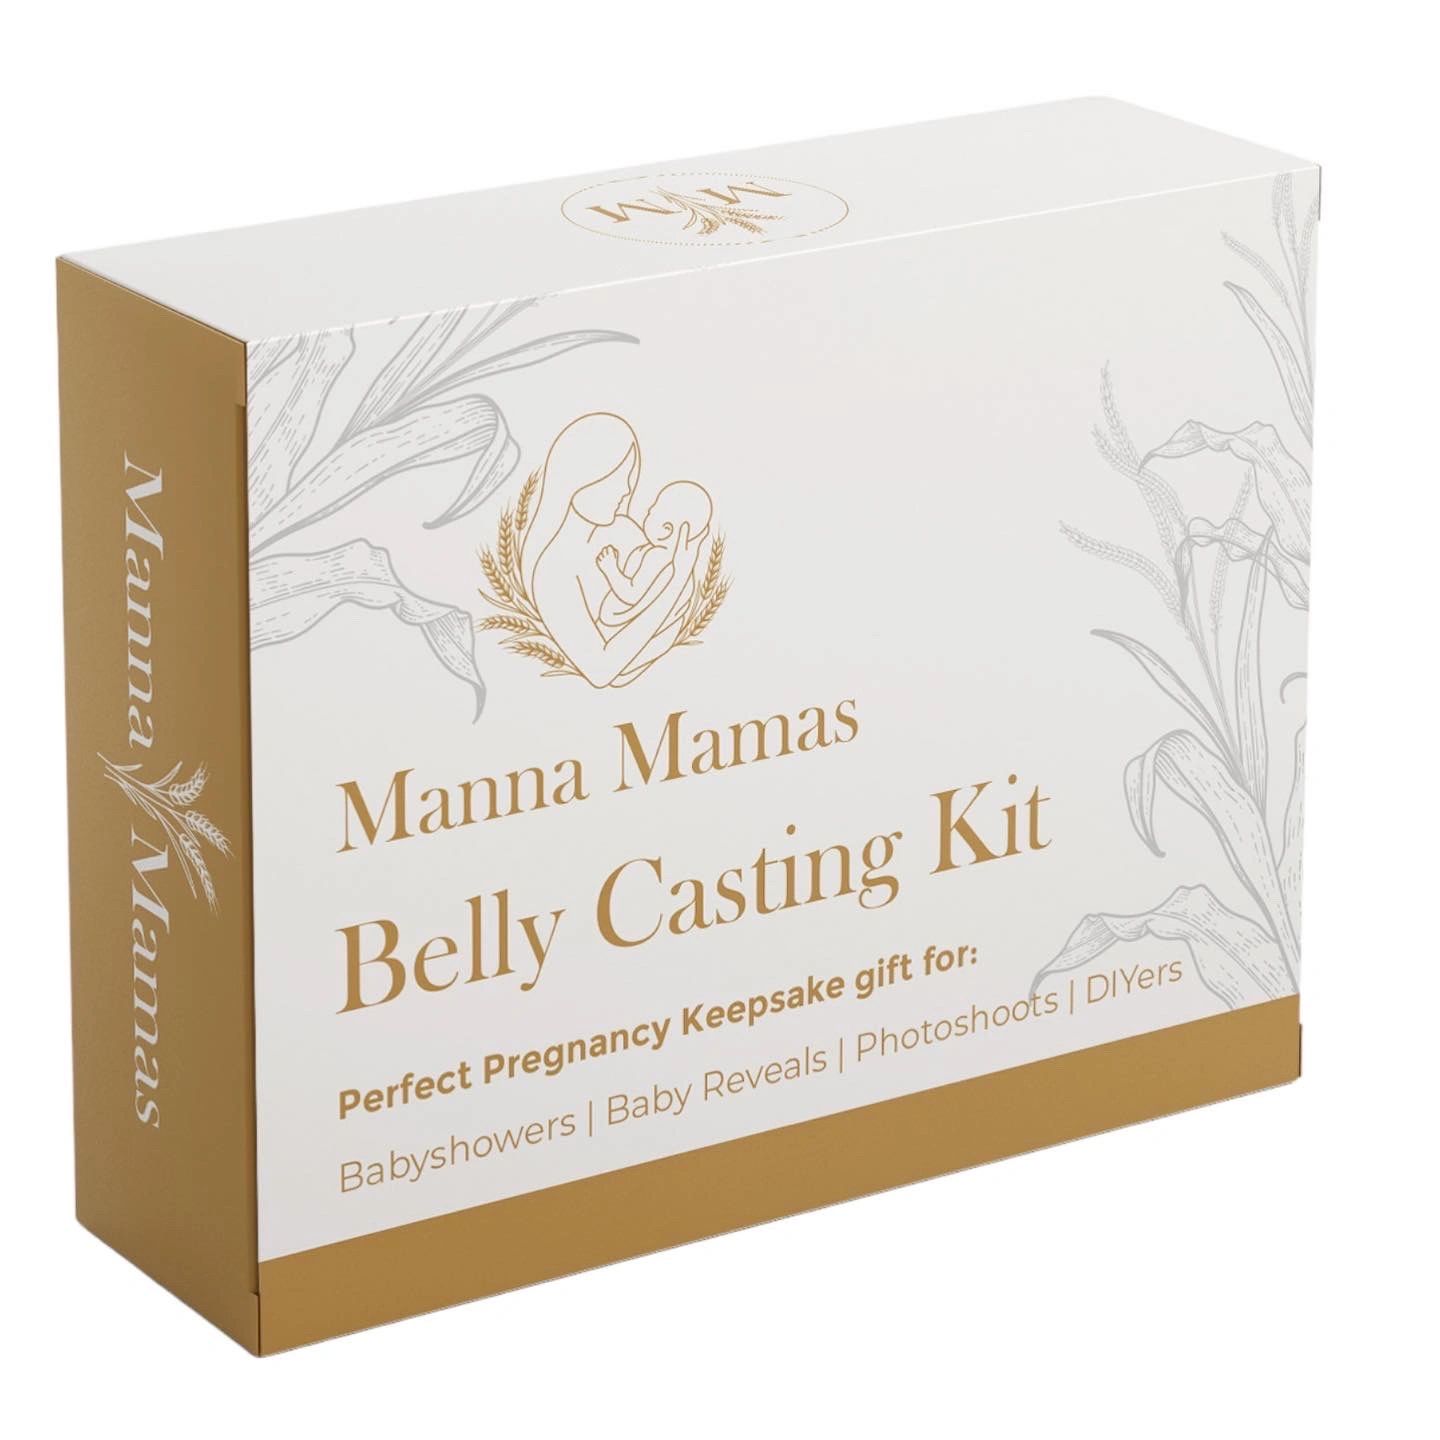 Manna Mamas - Belly Casting Kit, Pregnancy Belly Cast